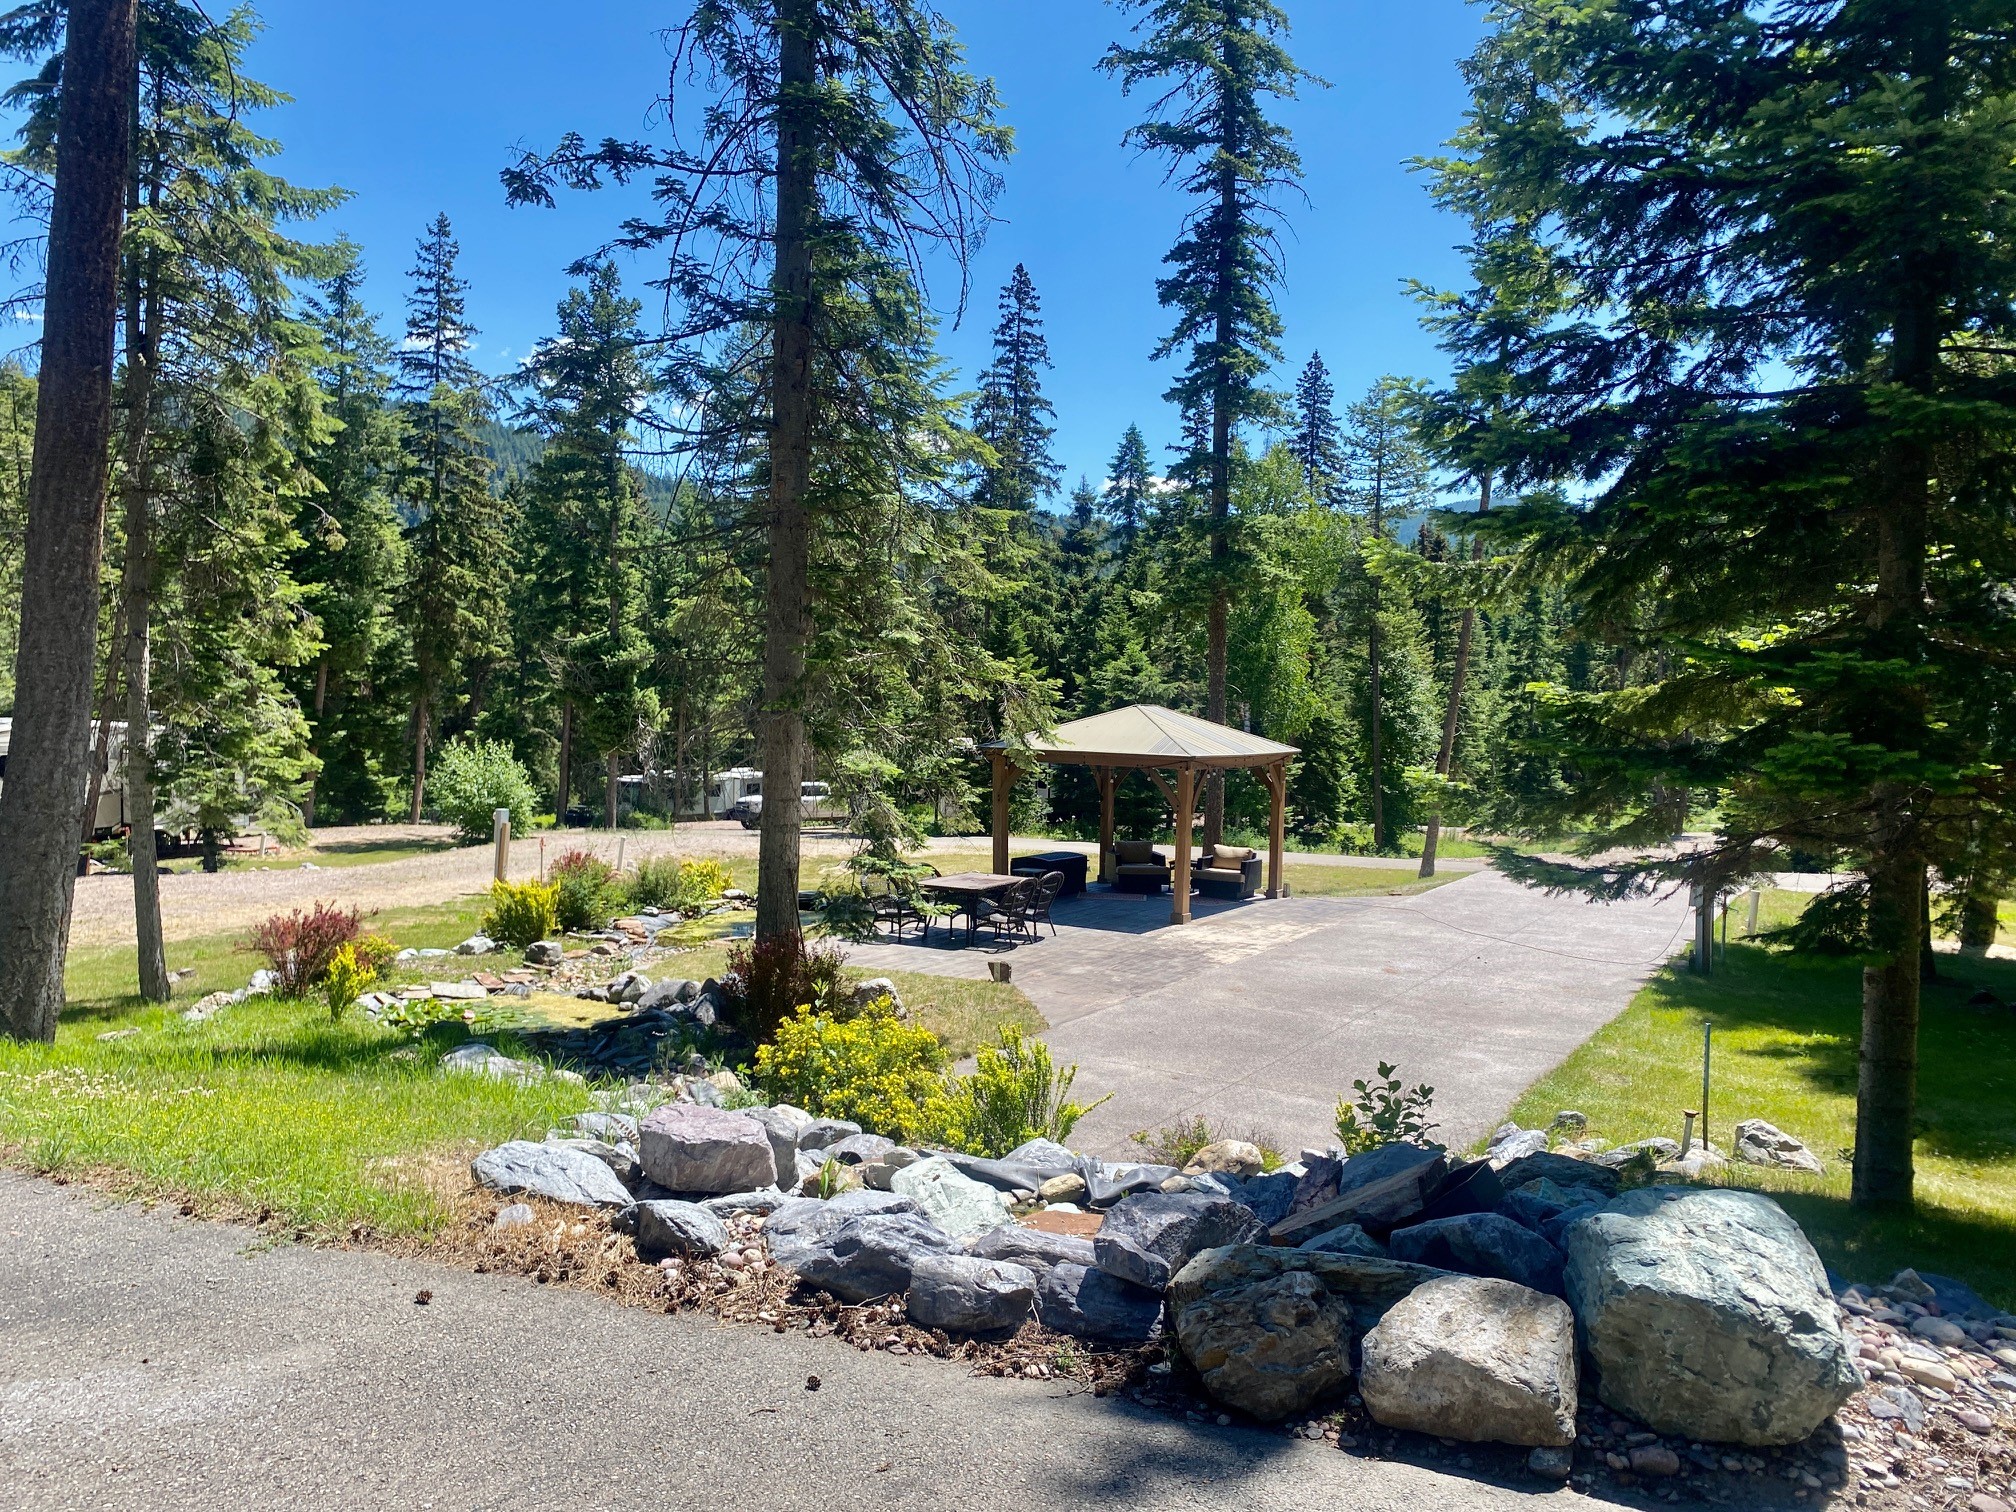 Montana’s Pine Meadow RV Retreat is a ‘condo-style’ Motorcoach RV Park that is conveniently located off MT Hwy. 35, just a few miles south of downtown Bigfork and 42 miles to Glacier National Park. This gorgeous secluded RV Park on 16.10 acres features 25 full hook-up sites 20/30/50 amp, 26 individual meters, water, sewer and 2 wells at 75 gpm. Premium site features a pergola, beautiful waterscape and pond. Two sites are stamped concrete with private bathrooms.  Sites can be individually sold with a physical mailing address to each site. See attached CCR’s provided under documents. Additional sites can be added pending DEQ/Lake County approval. Site #5 is excluded from purchase. Please call Catherine Evans at 406-531-6433 or your real estate professional.